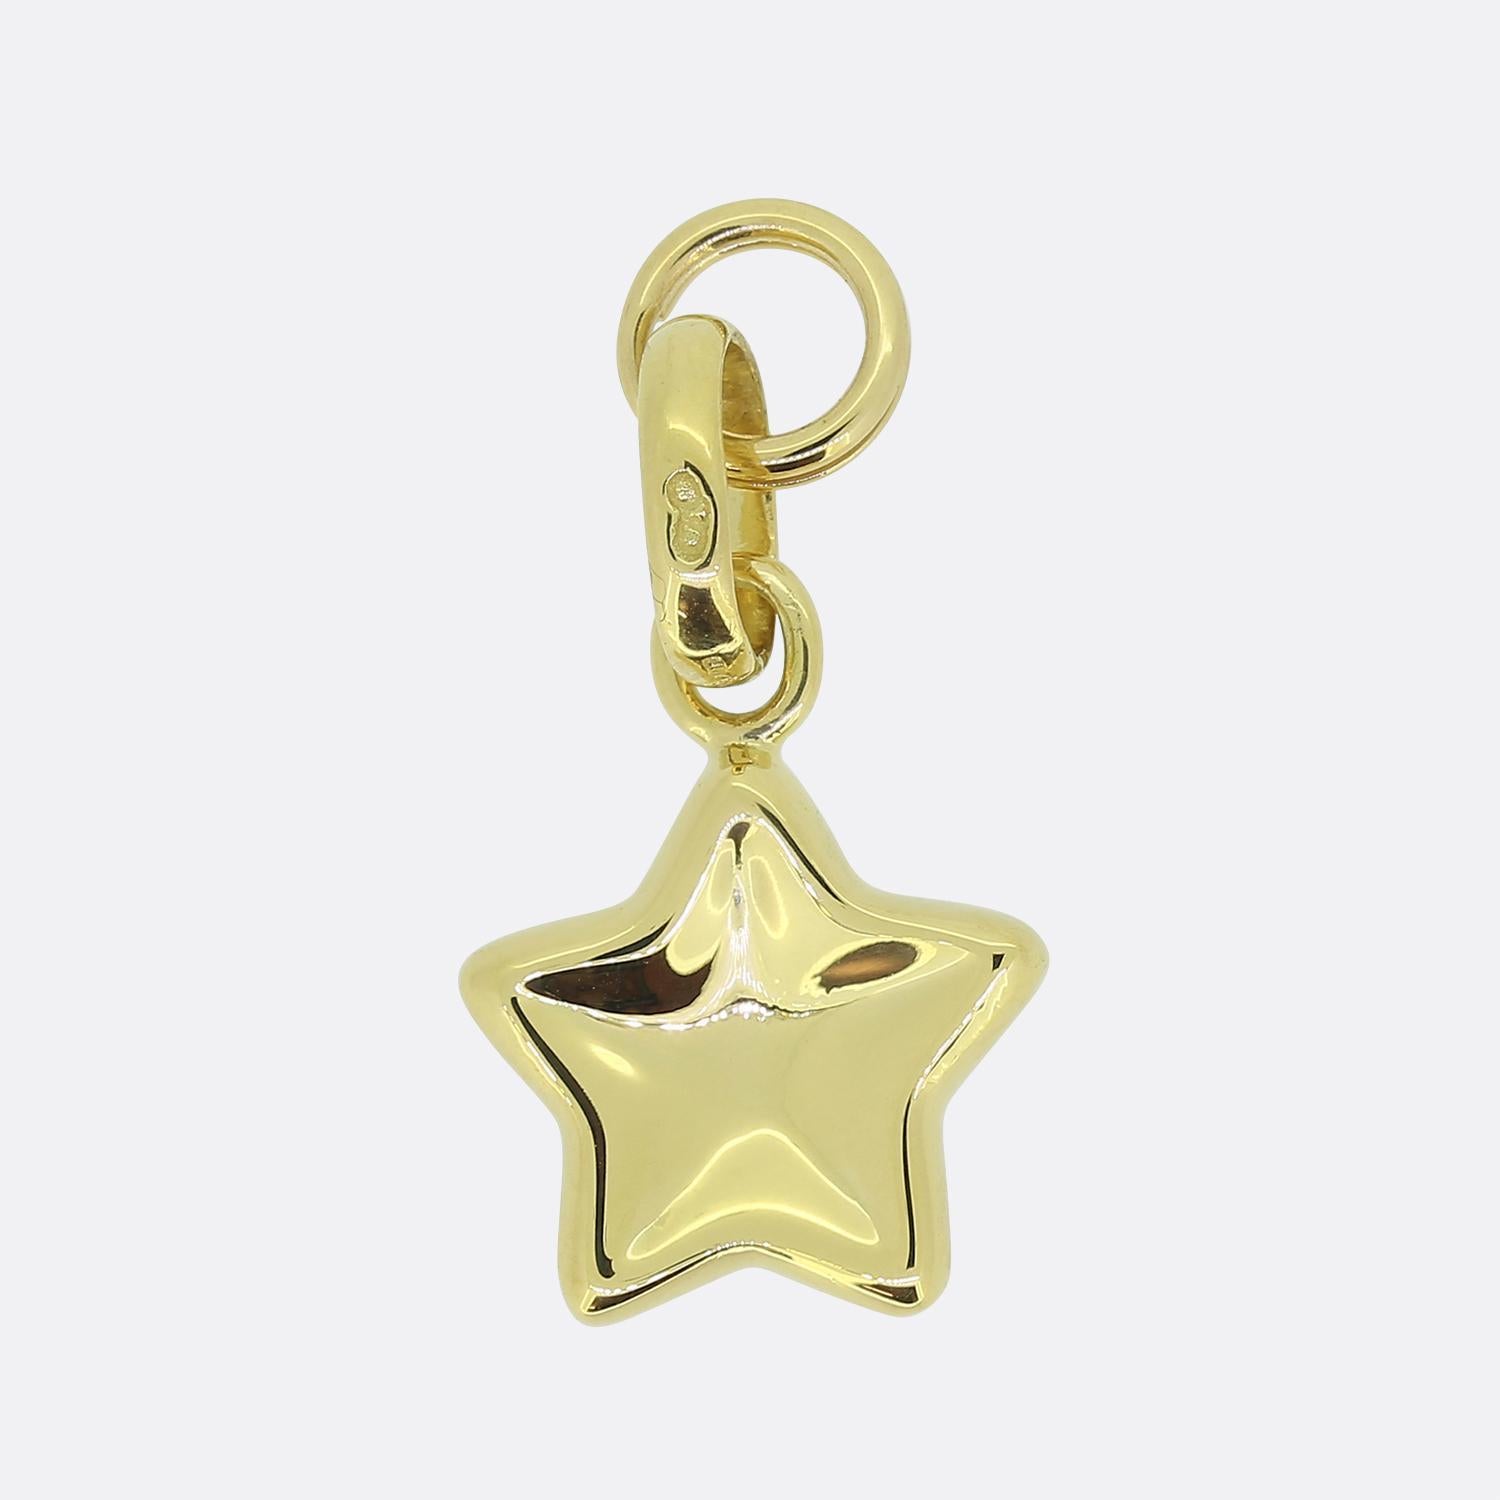 Here we have an 18ct yellow gold charm from the world-renowned (now retired) British jewellery designer, Links of London. This particular piece has been crafted into the shape of a five-pointed, thumb print star. Due to its size this charm could